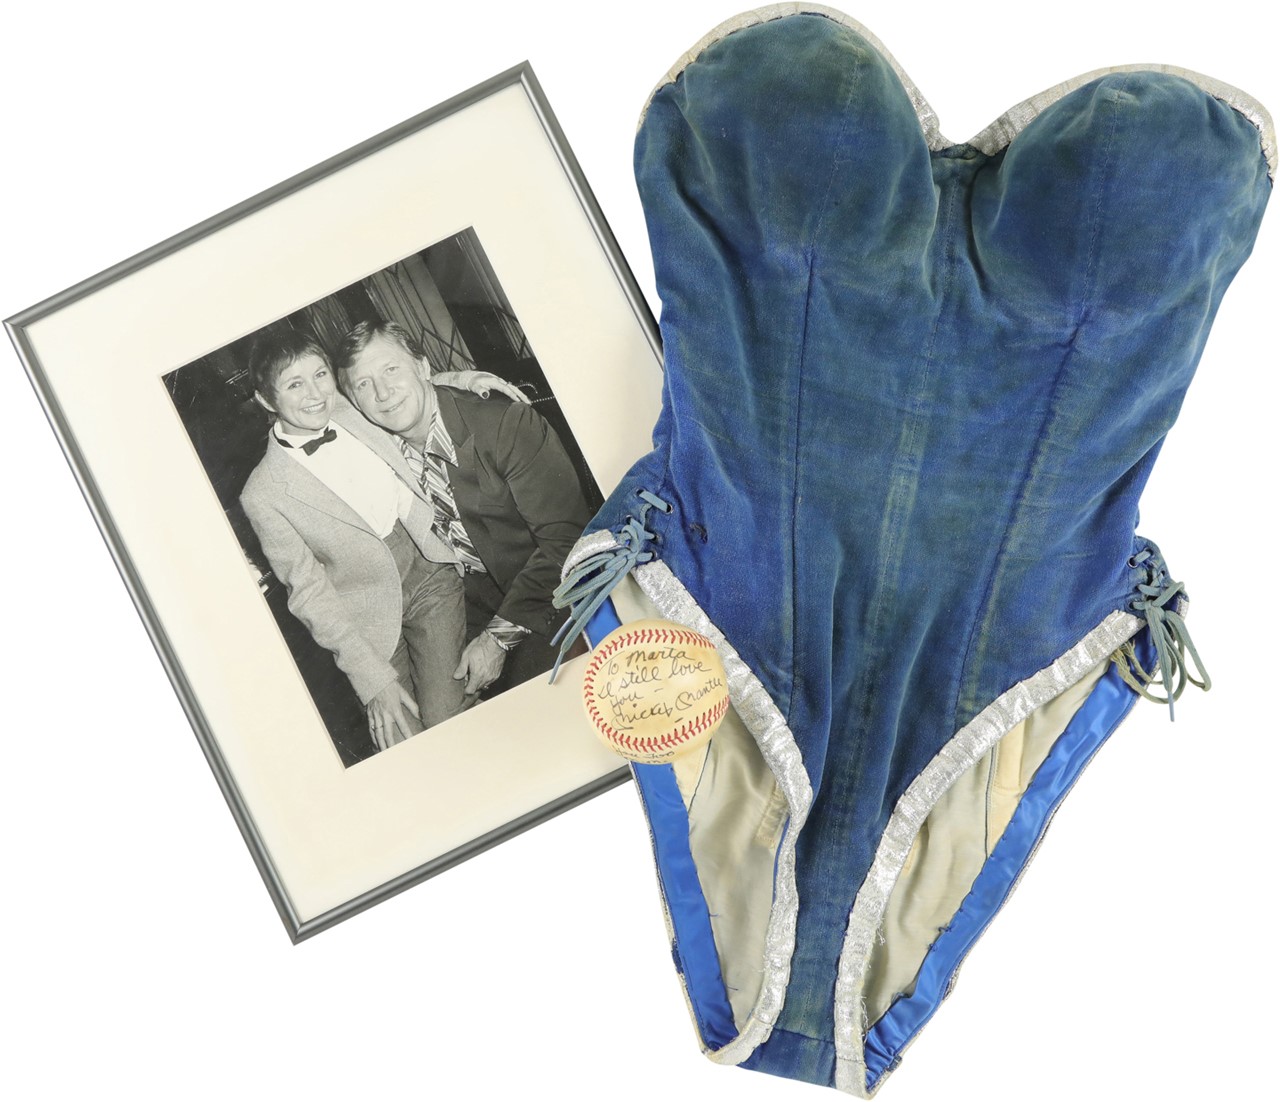 - Mickey Mantle Signed "I Still Love You" Baseball to Playboy Bunny Ex-Girlfriend with Bunny Suit and Impeccable Provenance (Photo-Match)